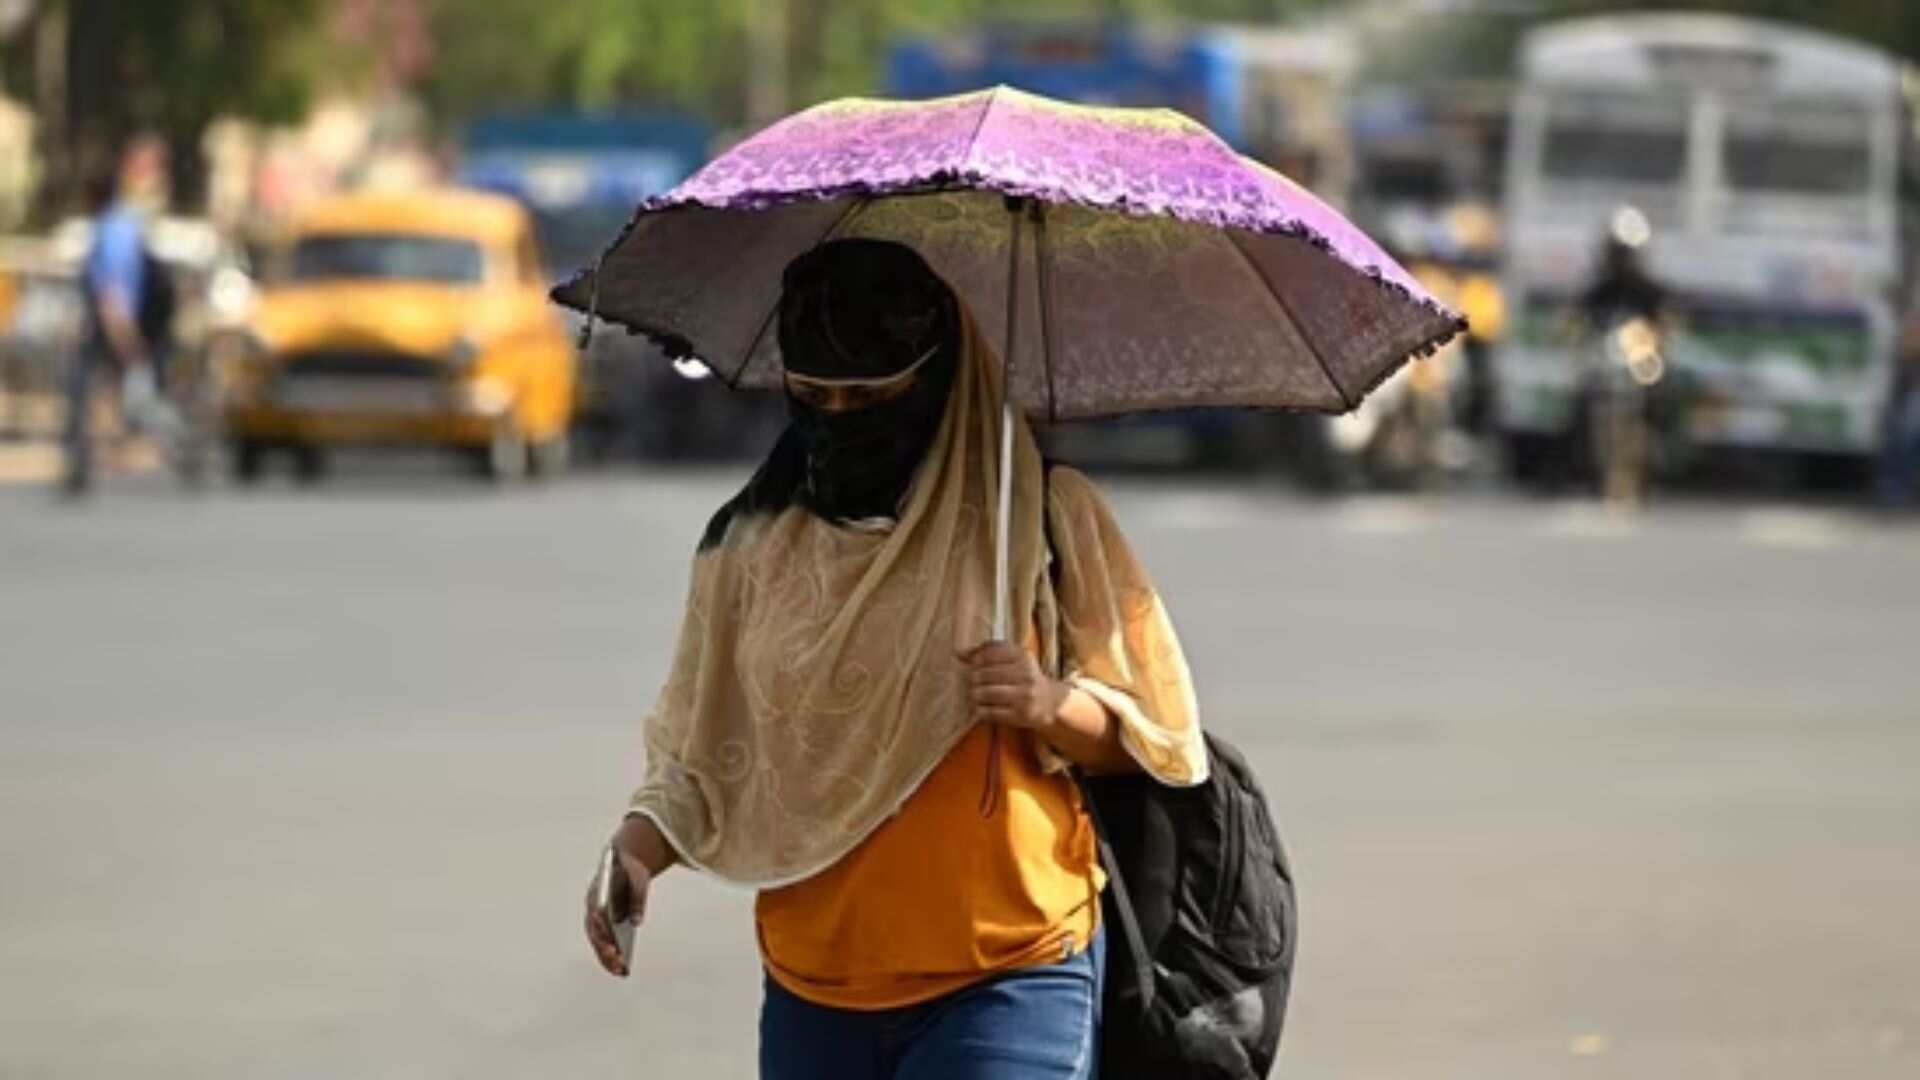 IMD issues heatwave alerts for Bengal, Odisha; possible relief from rain in these states